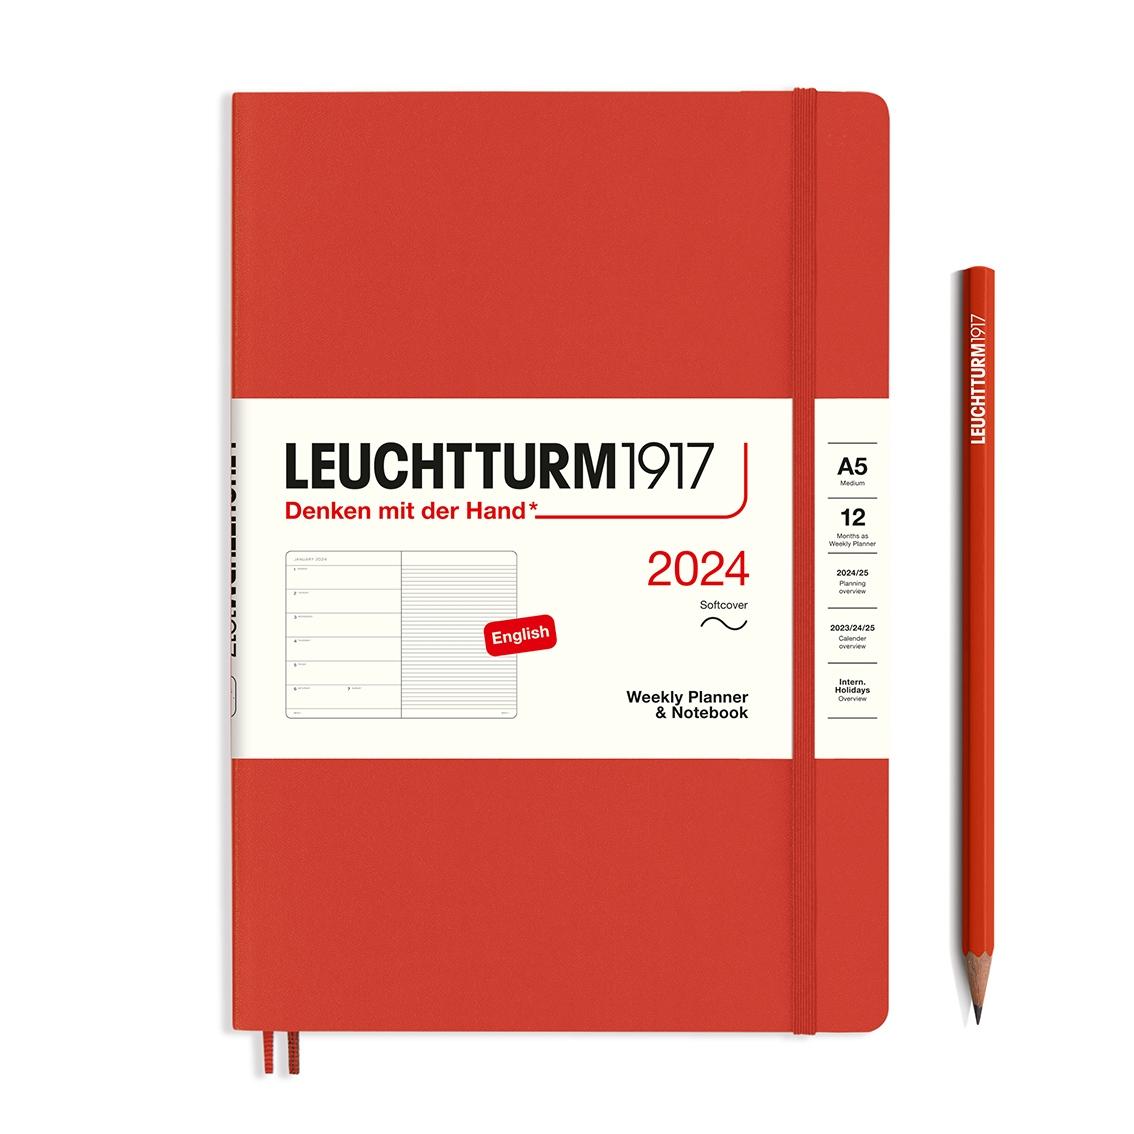 diary softcover weekly planner and notebook medium fox red by Leuchtturm1917